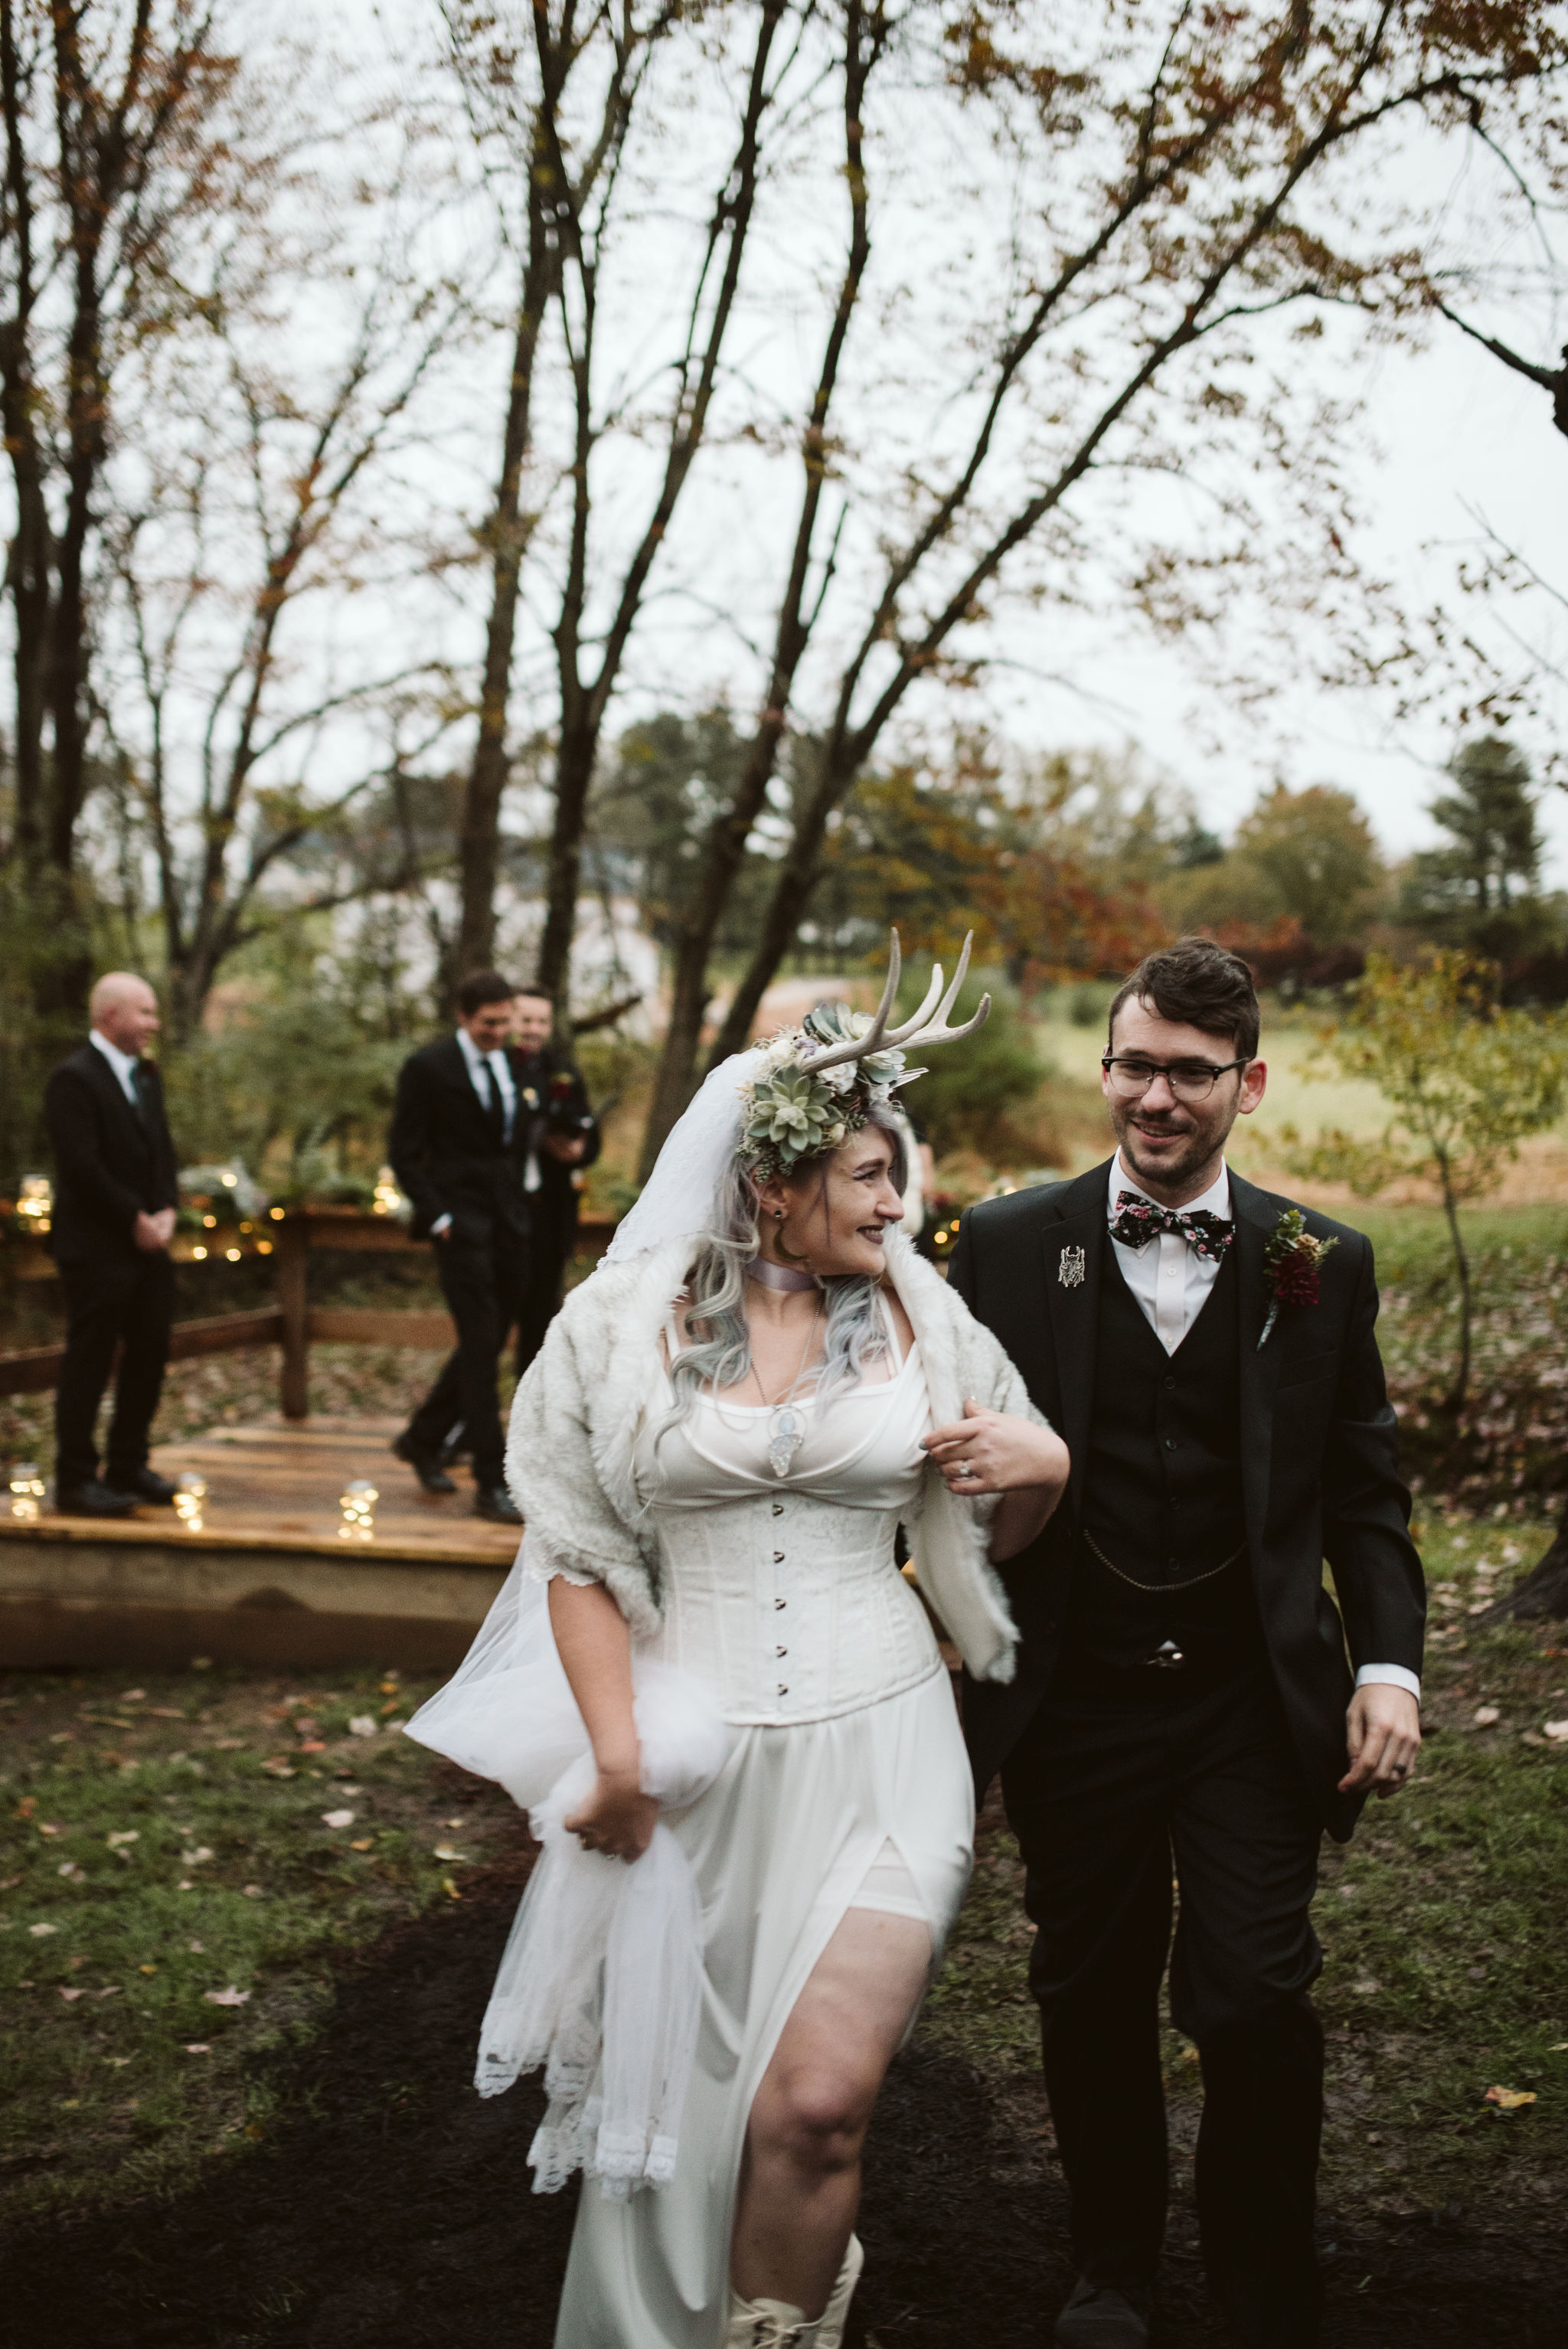  Maryland, Baltimore Wedding Photographer, Backyard Wedding, Fall, October, Dark Bohemian, Whimsical, Fun, Bride and groom Walking Down Aisle Arm in Arm, Just Married, Outdoor Ceremony 